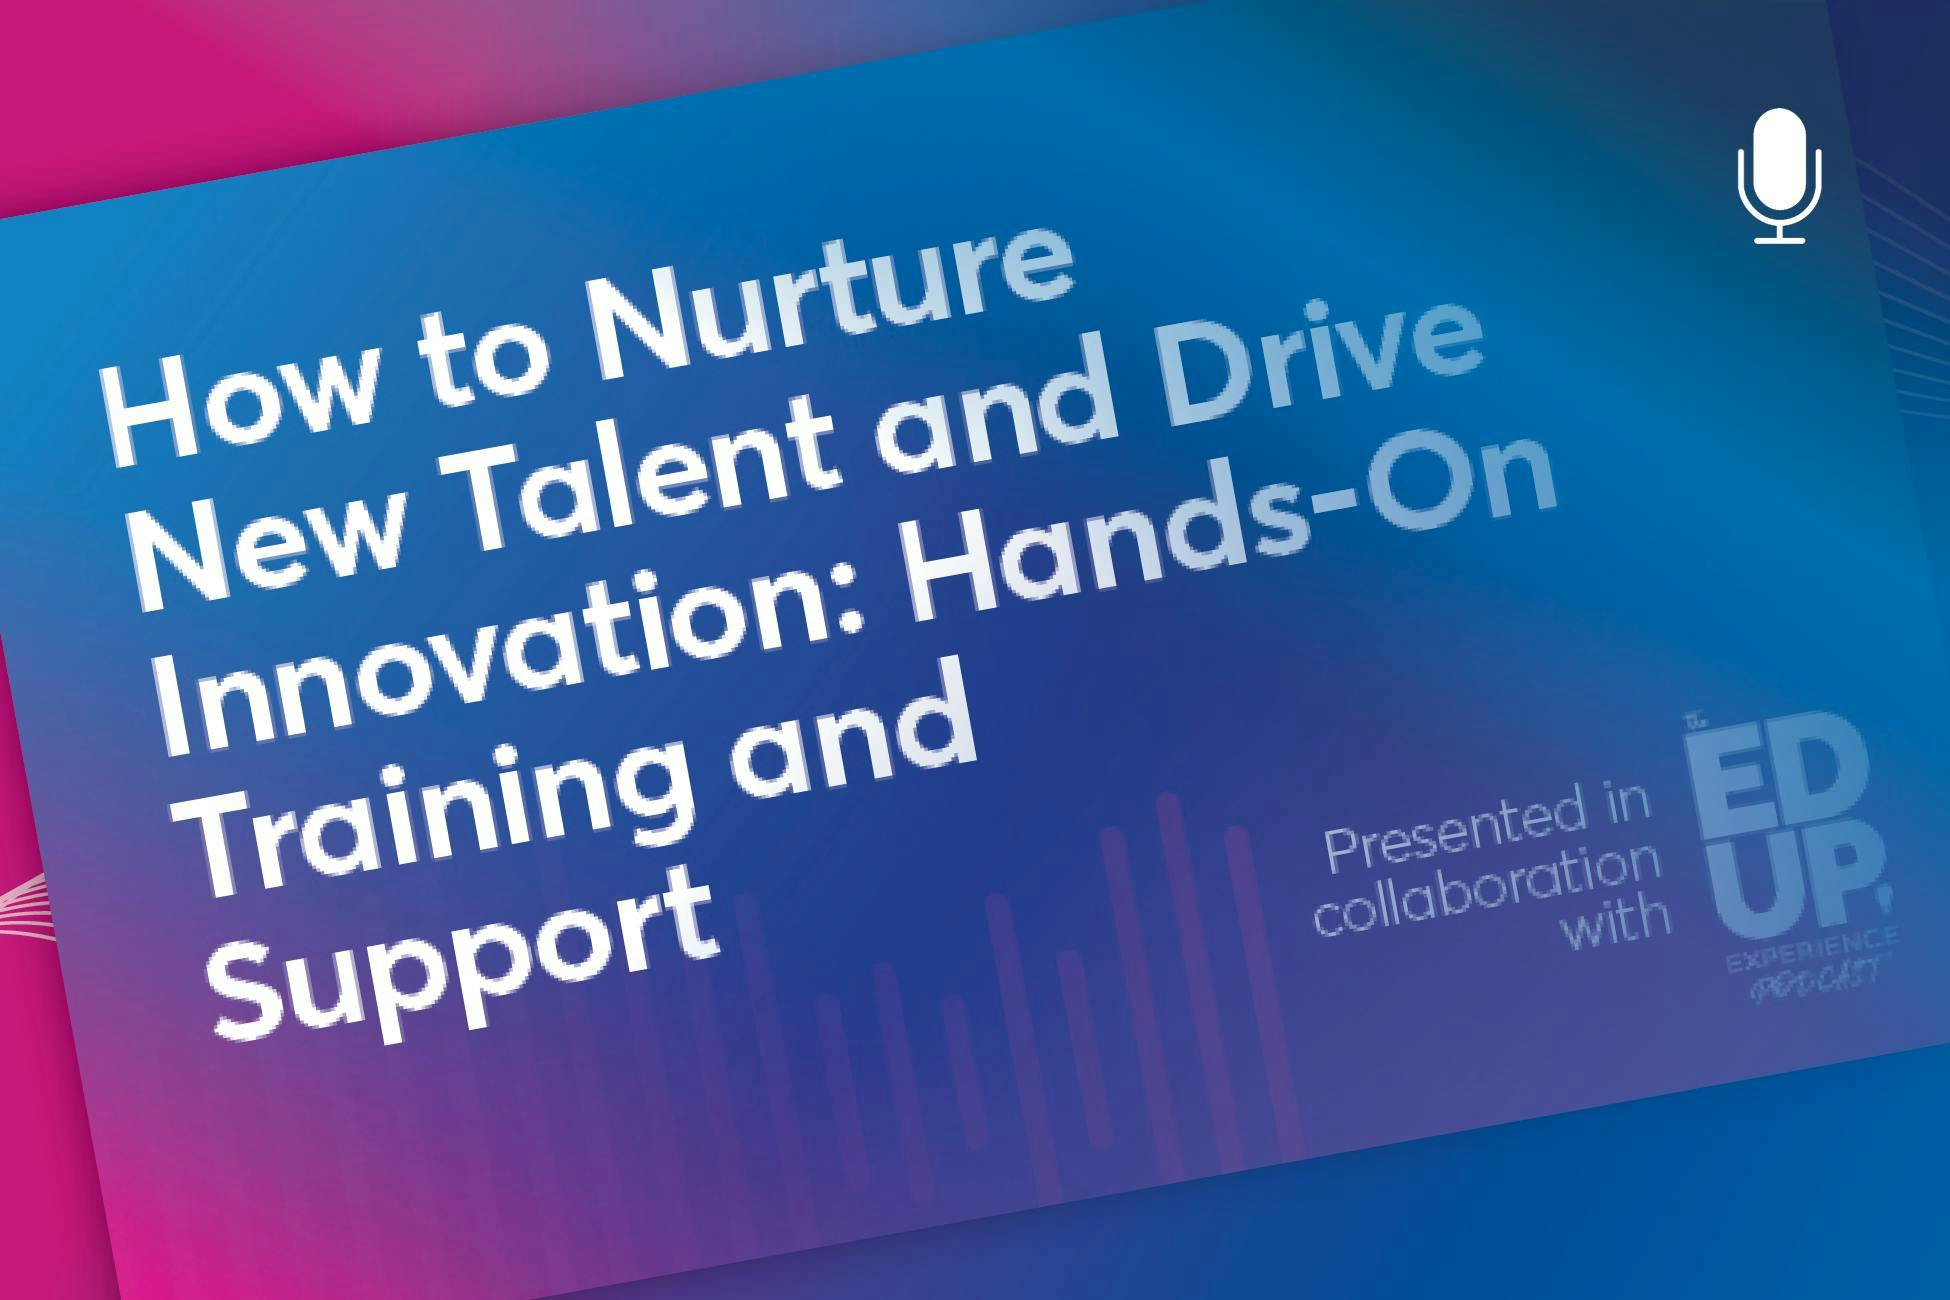 How to Nurture New Talent and Drive Innovation: Hands-On Training and Support